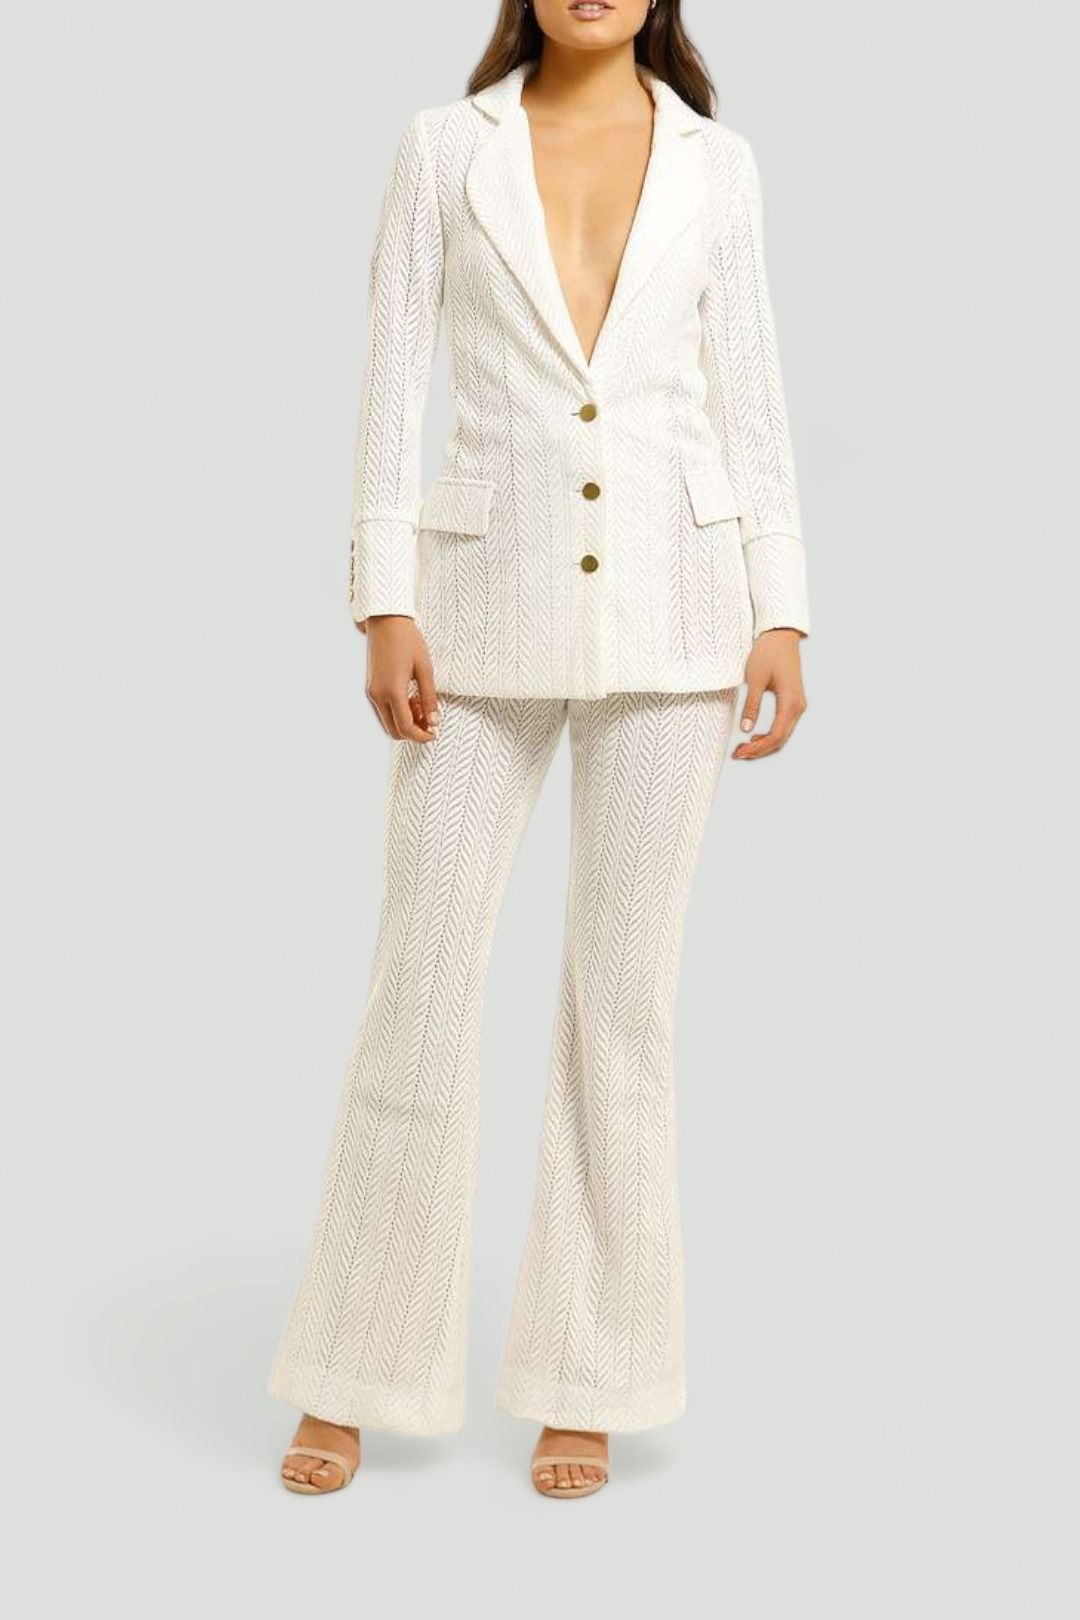 We-Are-Kindred-Marbella-Blazer-and-Pant Set-Frost-Front